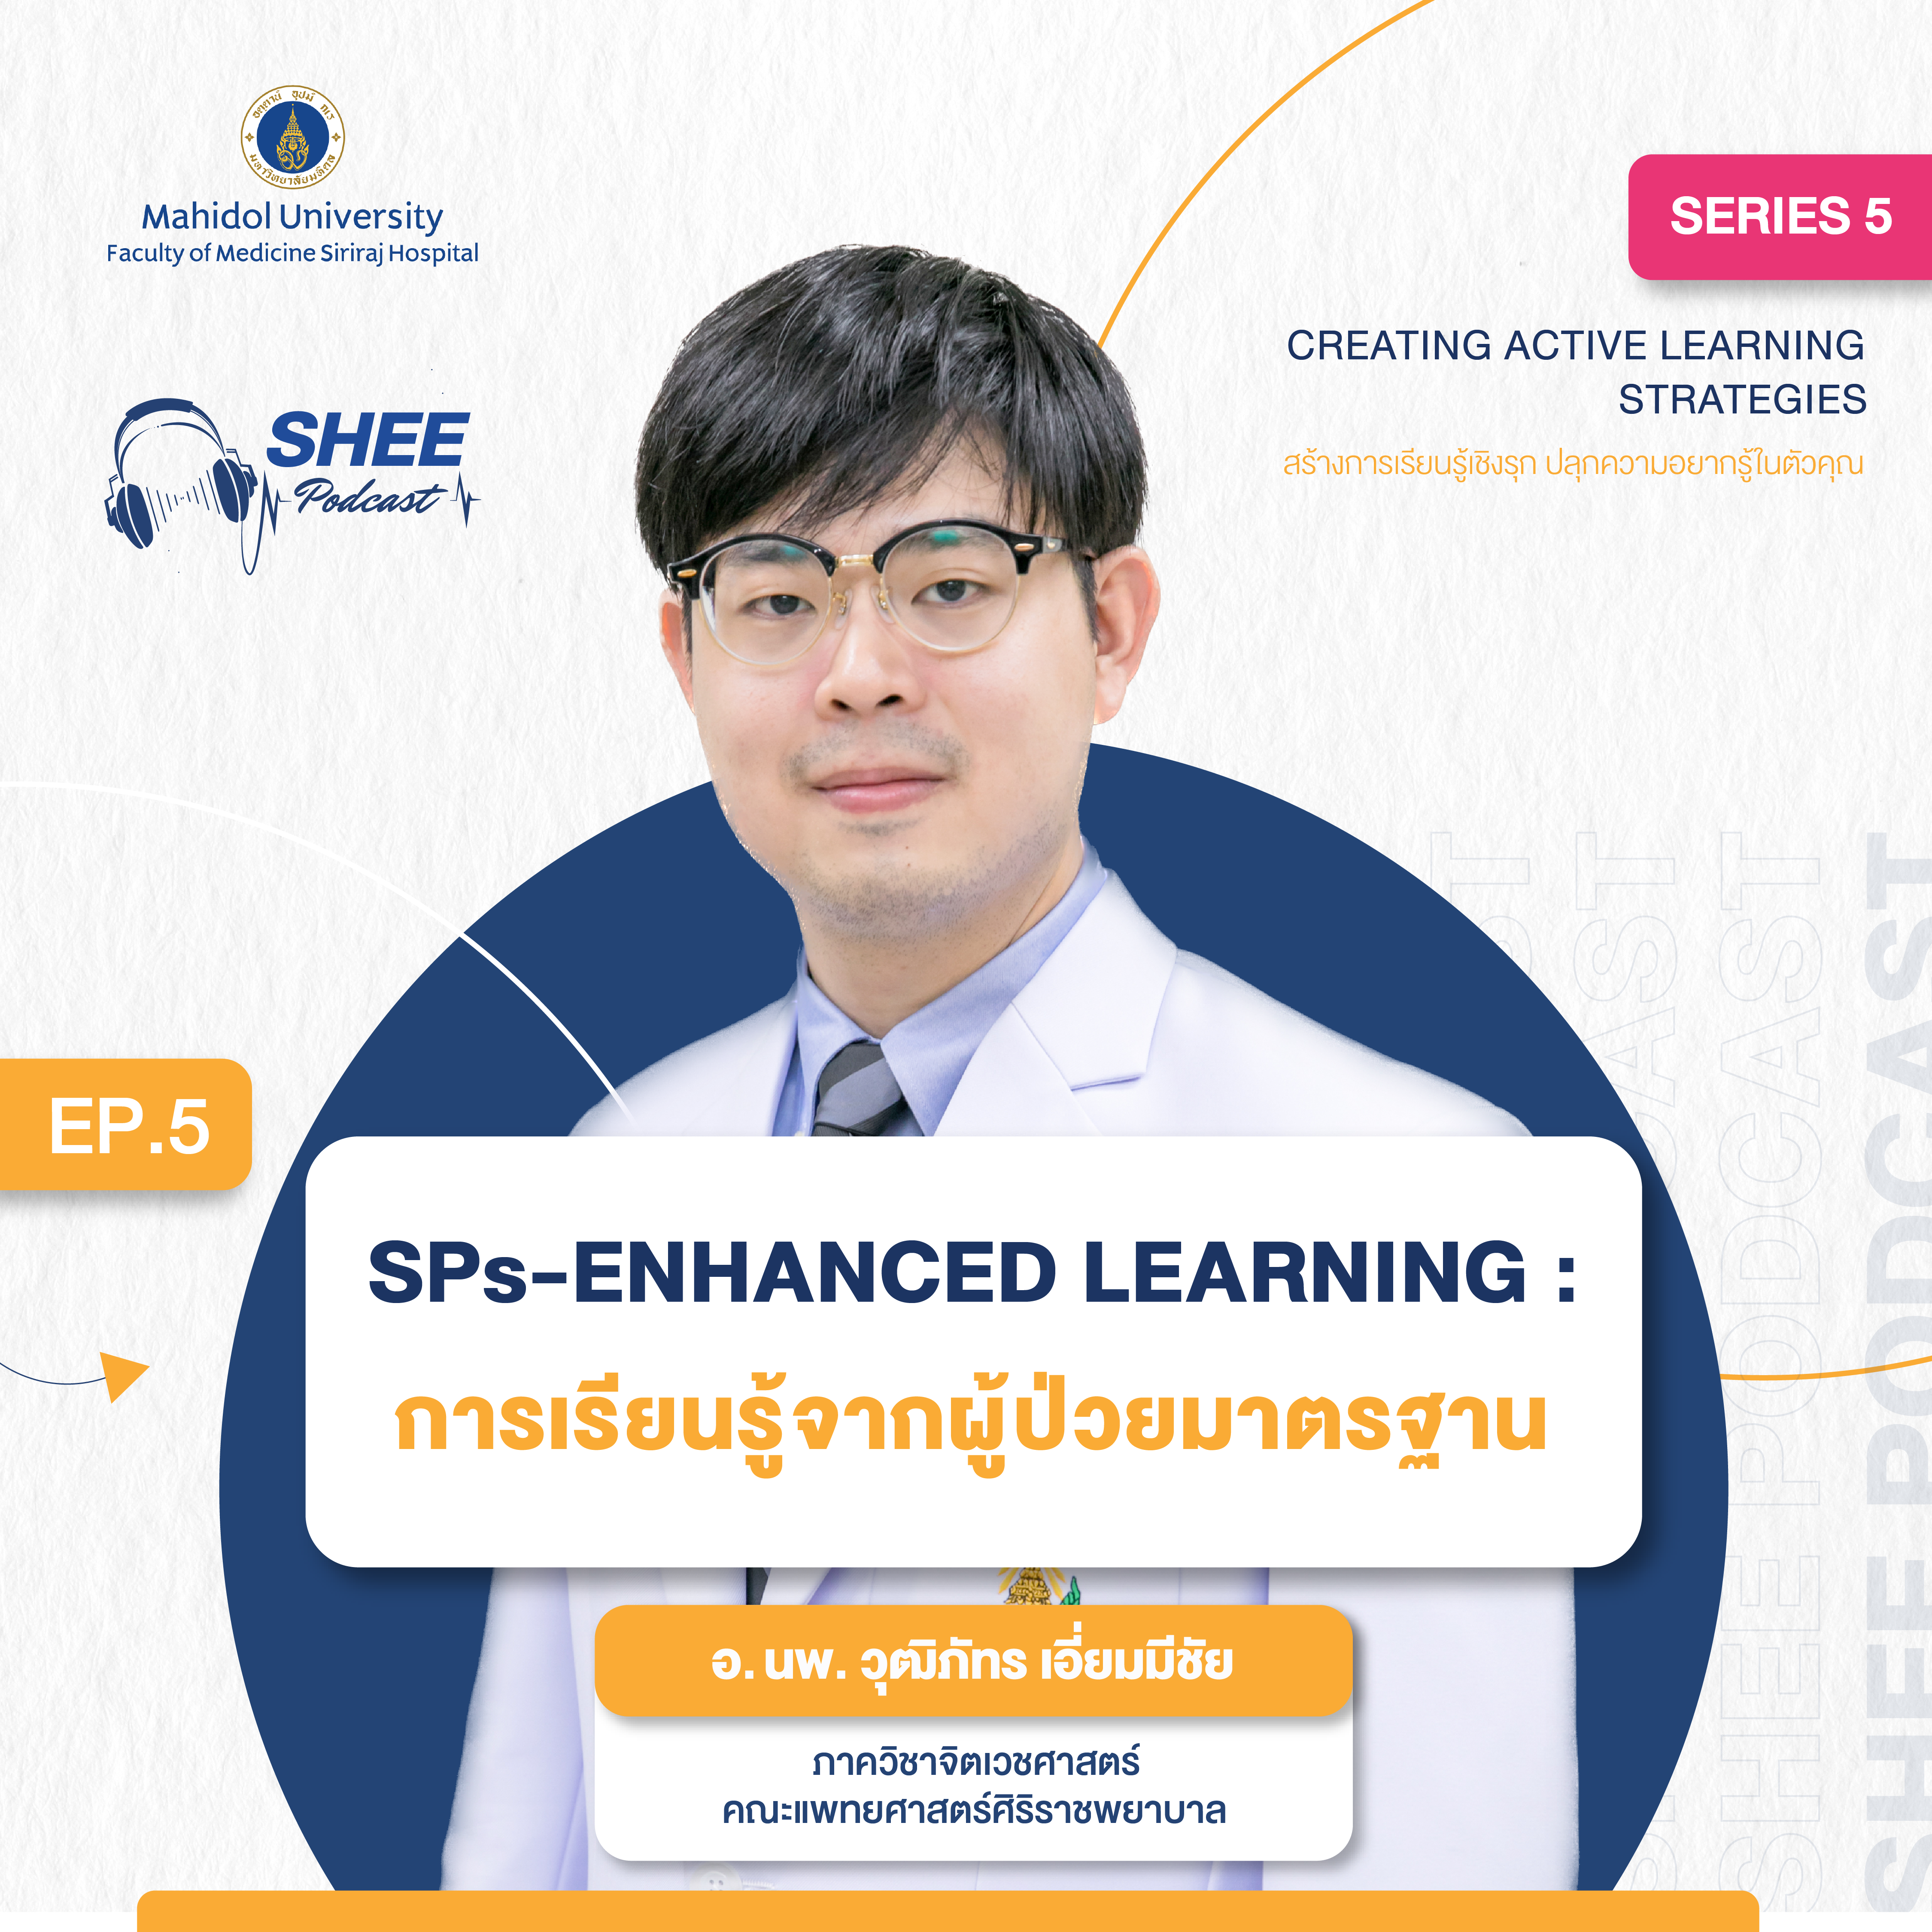 Episode 5 : SPs-enhanced learning : more experience with the real patients